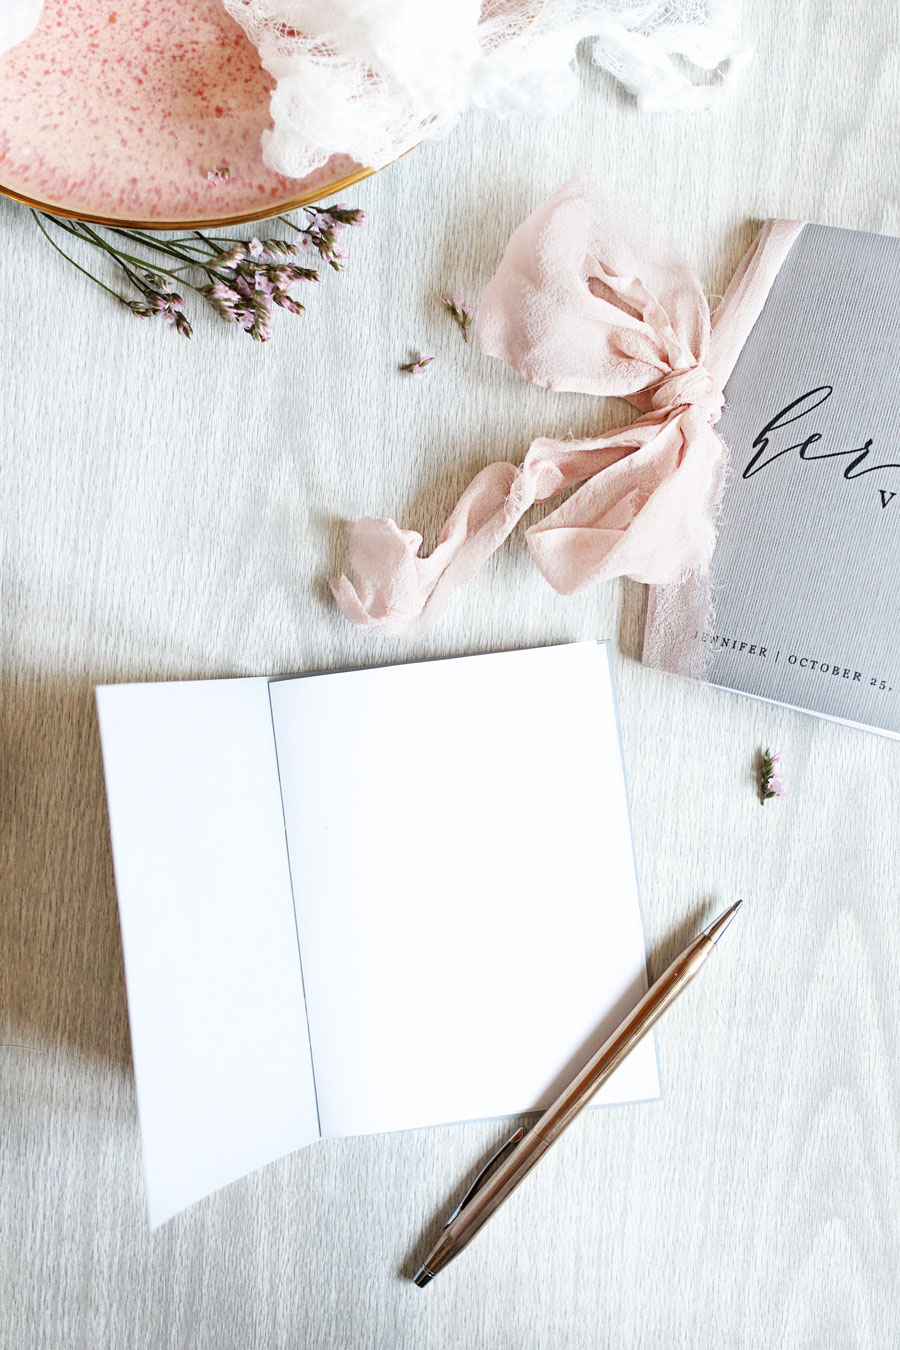 Looking for ways to make your wedding ceremony more special? Make these dreamy diy vow books to record your vows and cherish them for years to come.